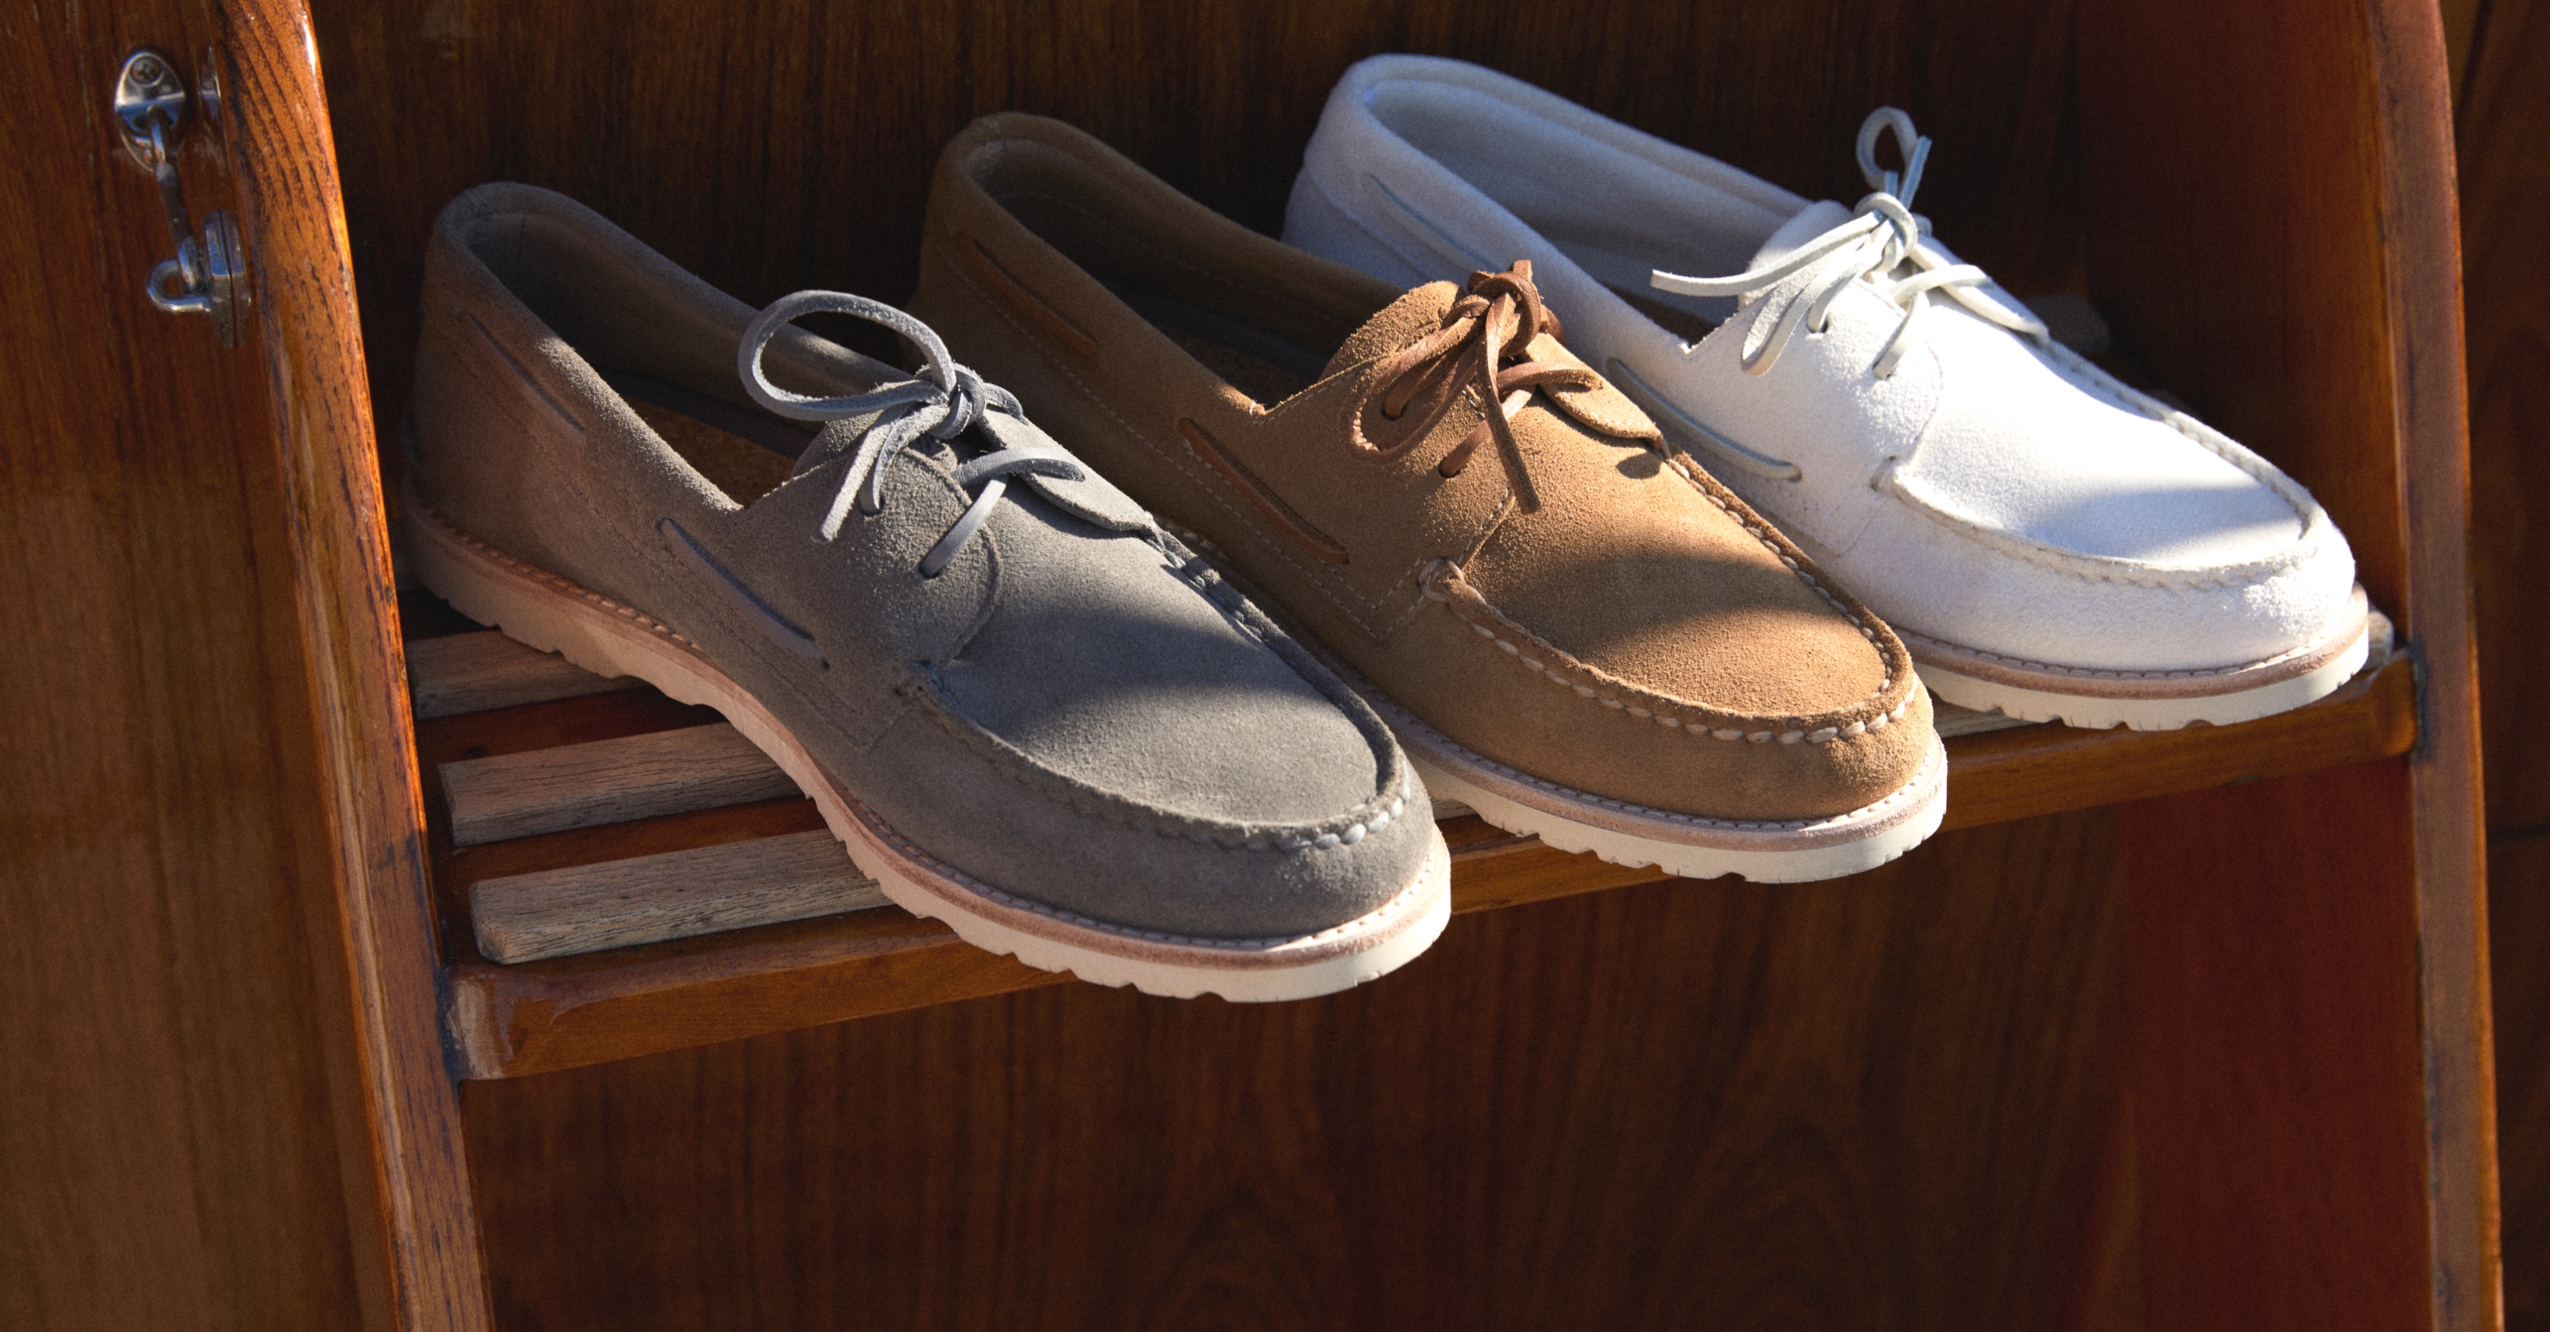 Todd Snyder &amp; J. Crew Release New Versions Of Iconic Sperry Boat Shoe